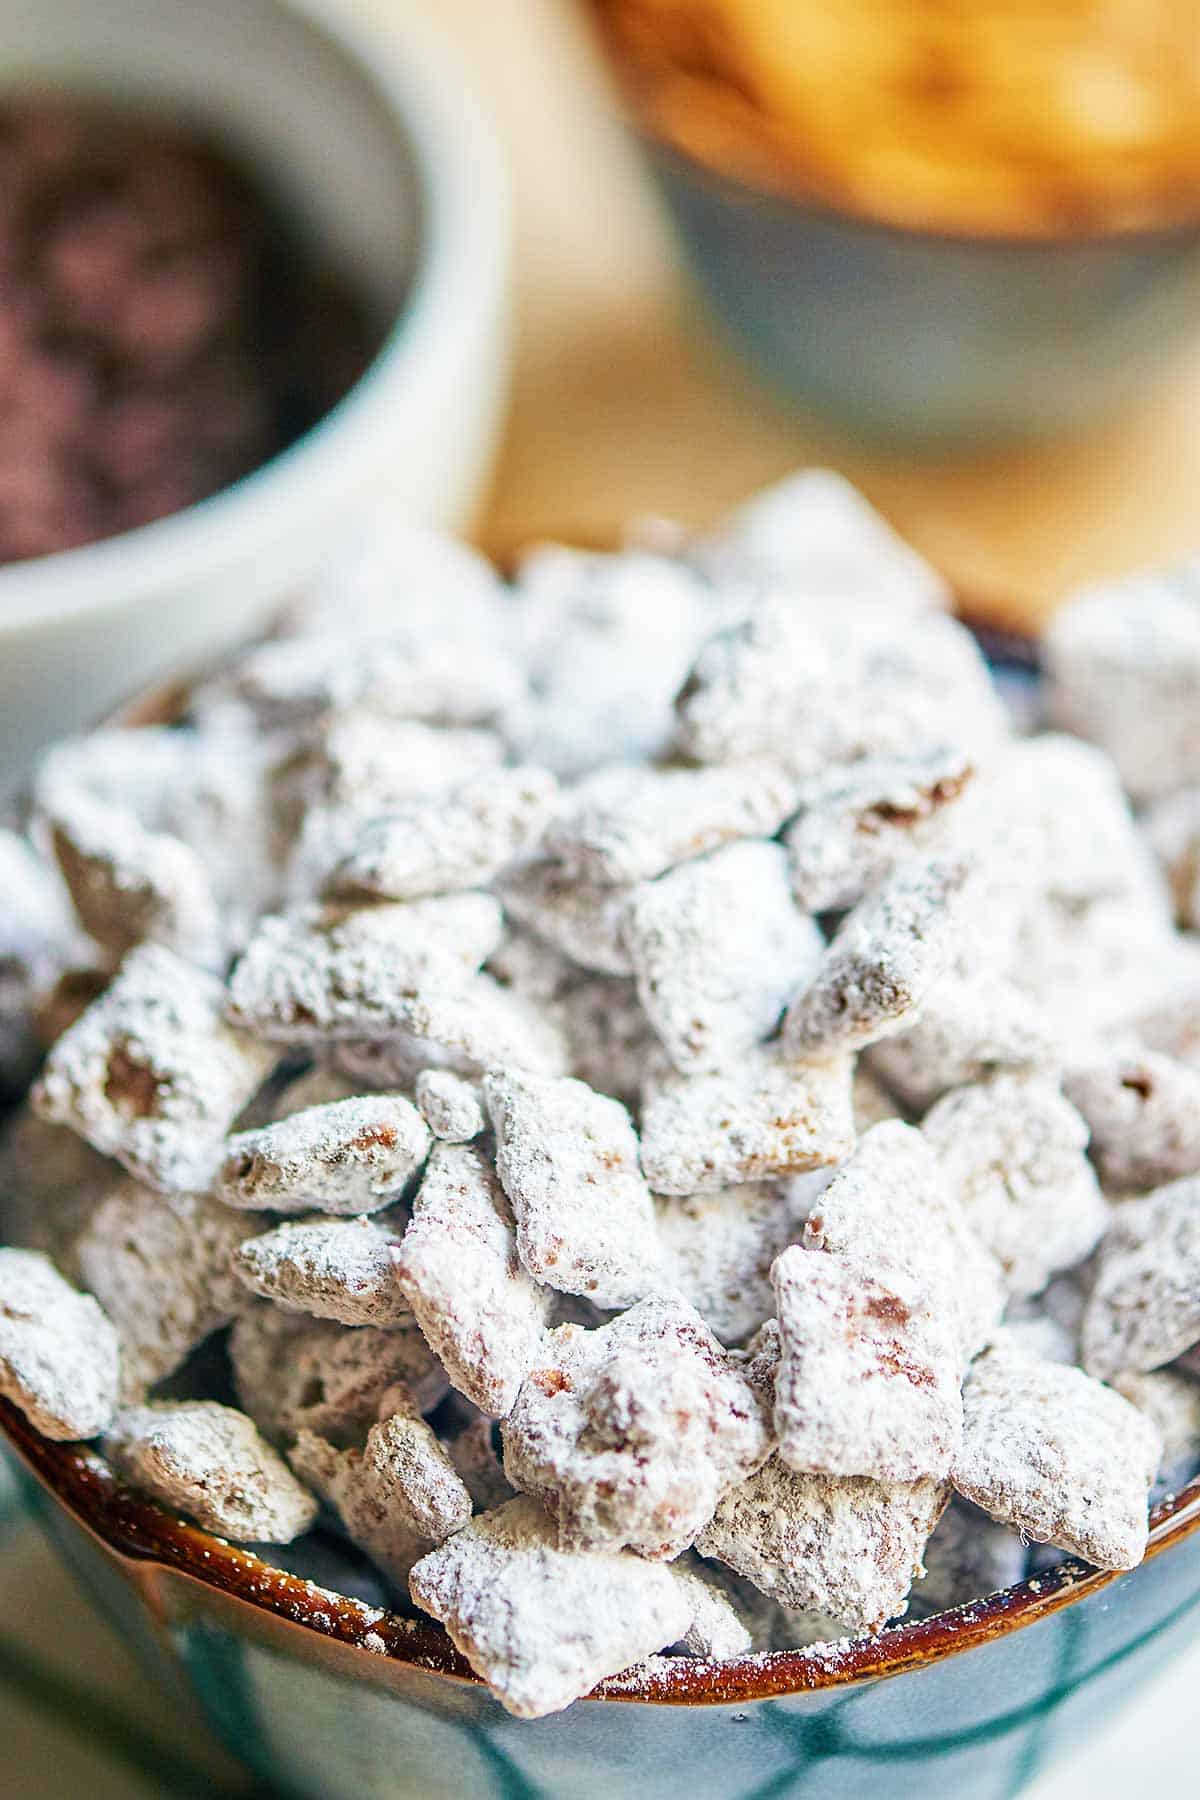 Best Puppy Chow Recipe Aka Muddy Buddies Uses Whole Cereal Box,Portable Gas Grills Amazon